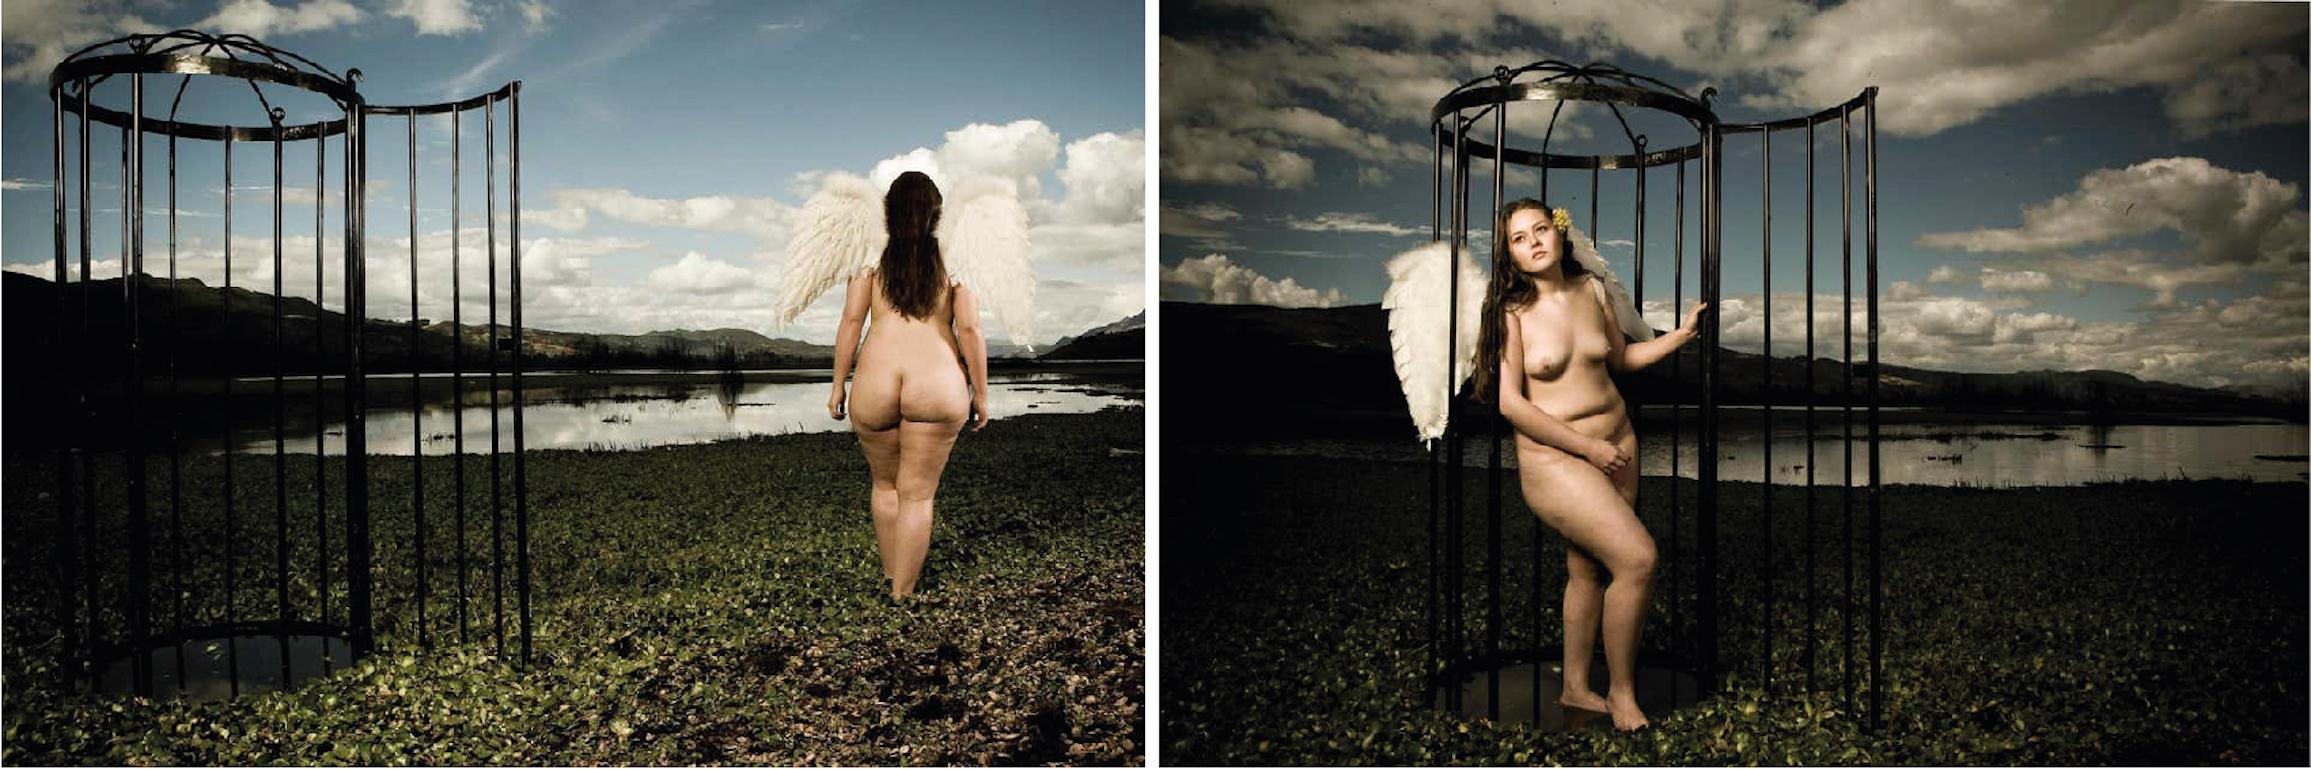 Mauricio Velez Color Photograph - Diptych From 'Beauty and Fantasy' series. Nude and Landscape  Color photograph